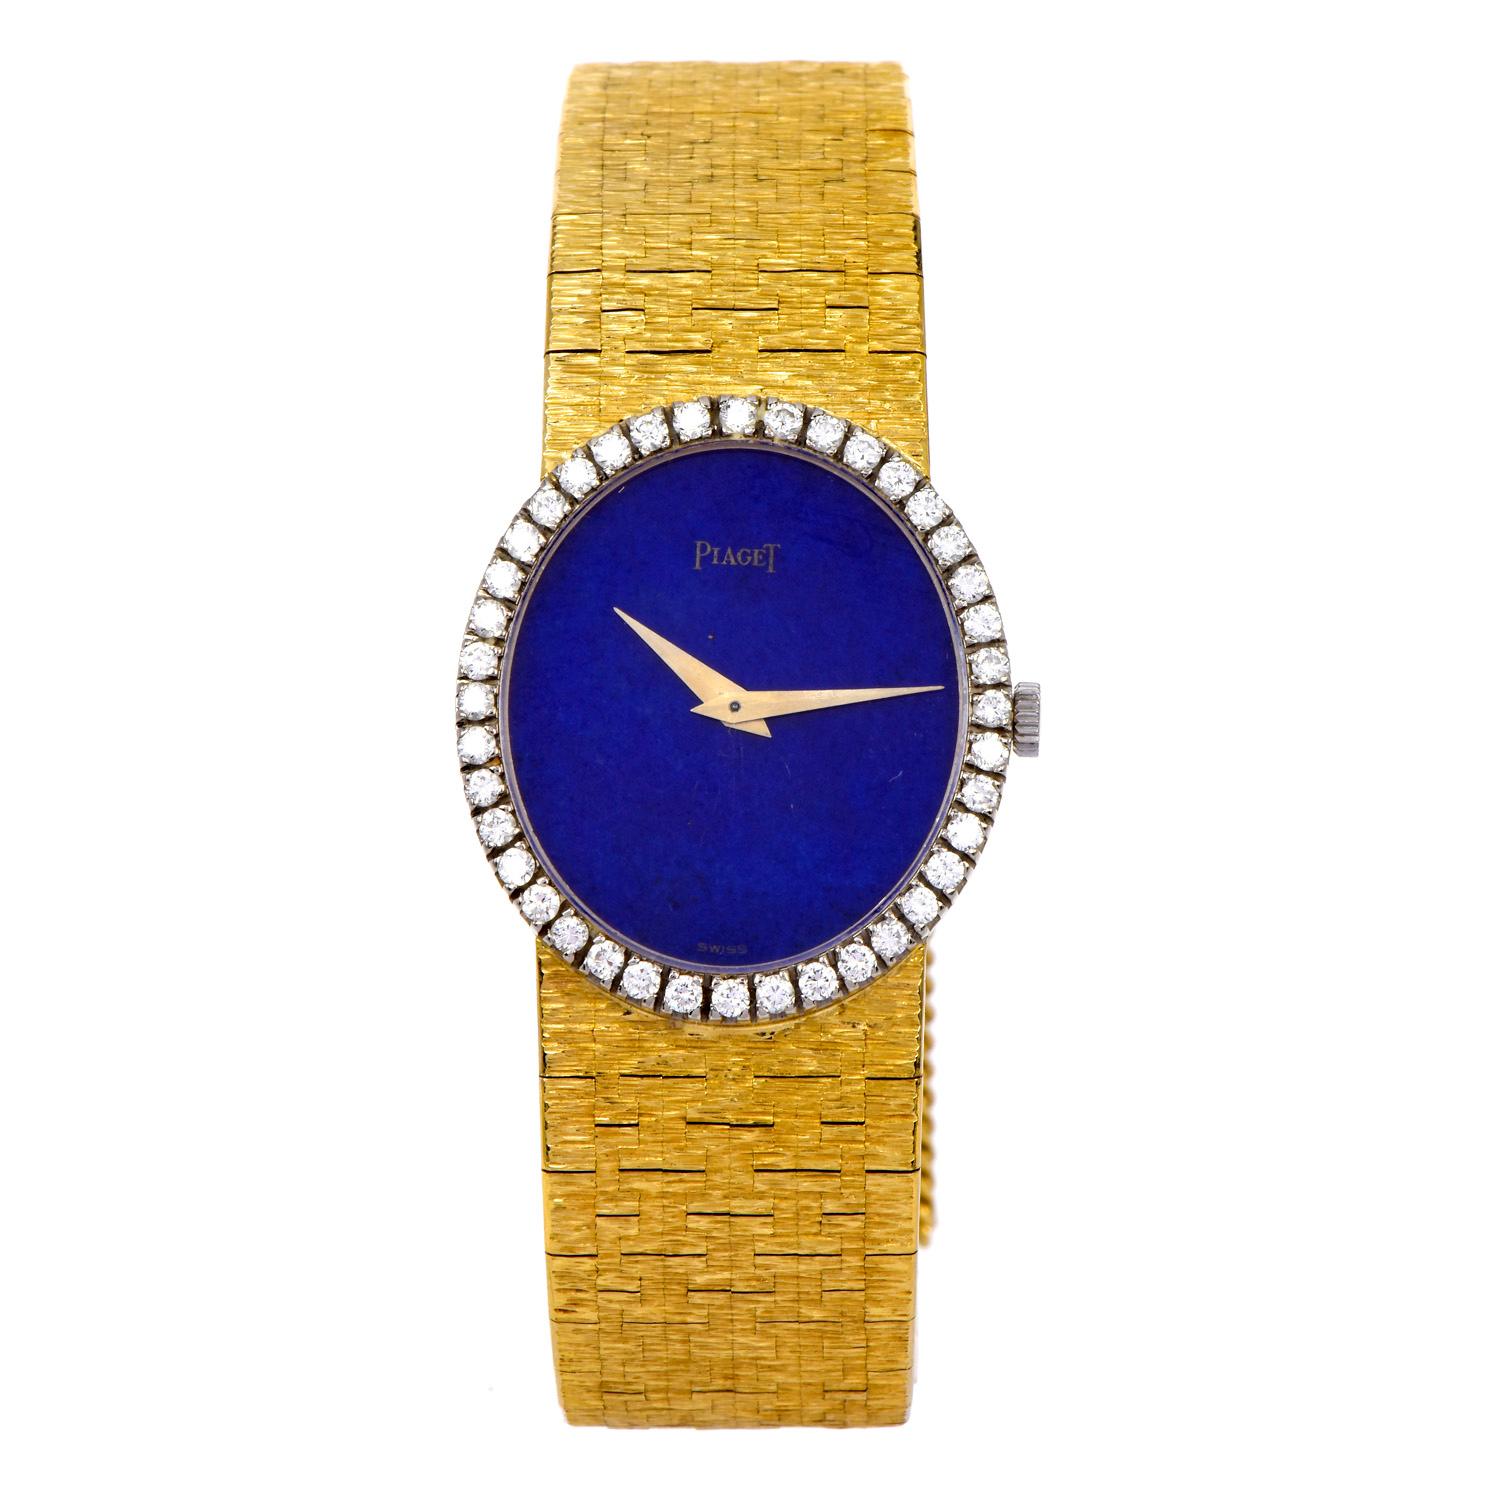 Circa Late 1960’s designer Piaget ladies watch crafted in solid 18-karat yellow gold. 

Embellished with factory set diamond. Sapphire Crystal, Genuine Lapis Dial, 24mm case( without Crown), and 40 factory set round diamonds approx. 0.70 carats, E-F